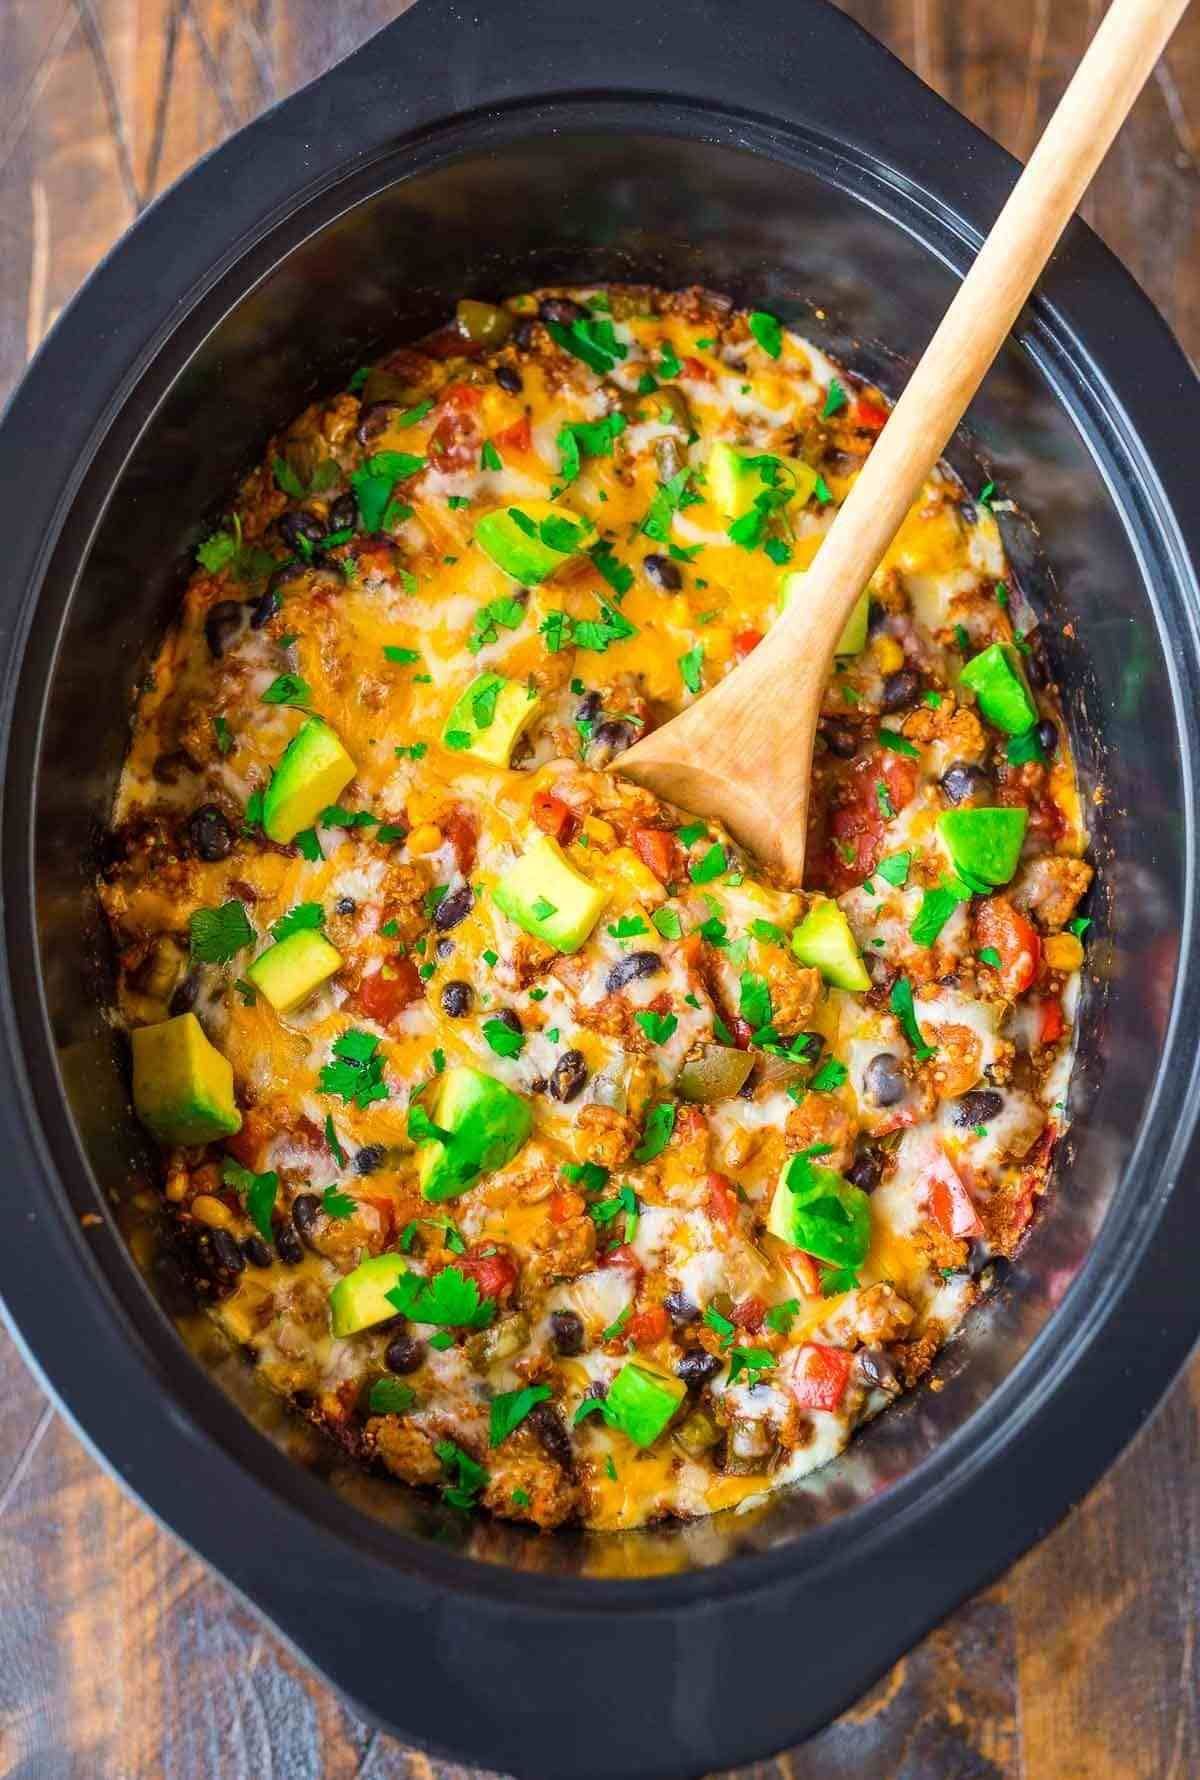 Crock Pot Mexican Casserole -   19 healthy recipes For Two link ideas